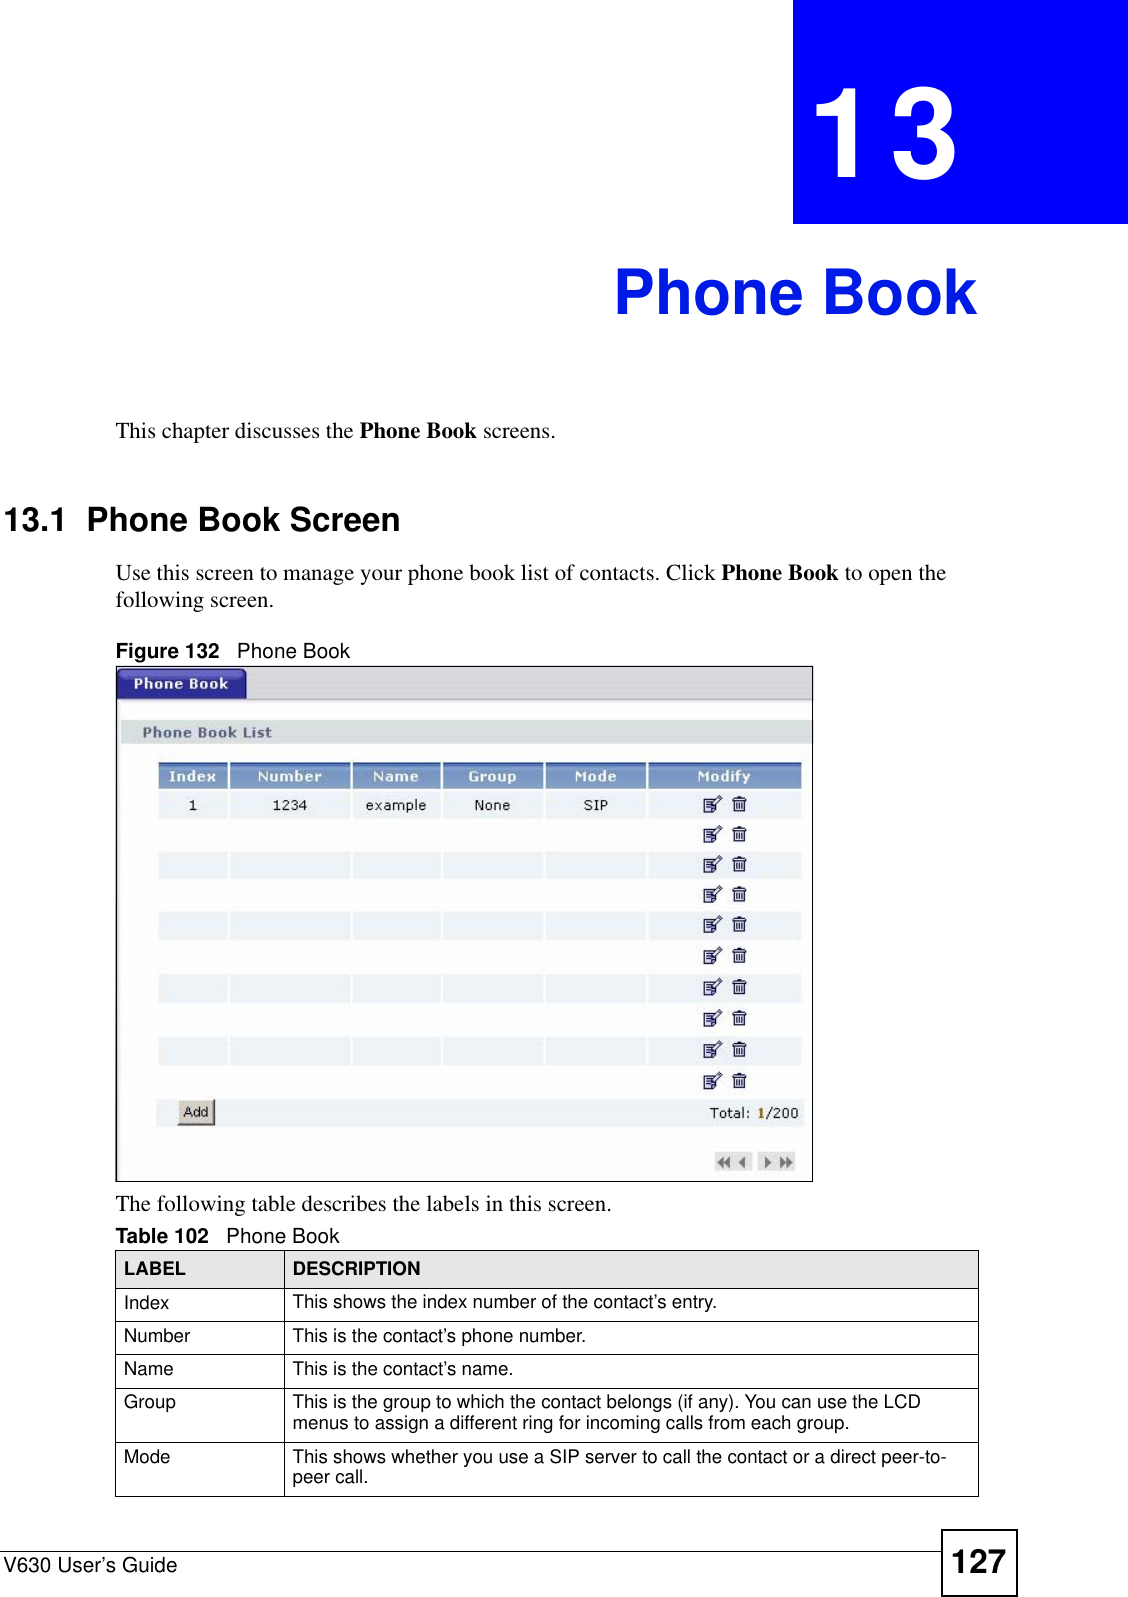 V630 User’s Guide 127CHAPTER  13 Phone BookThis chapter discusses the Phone Book screens.13.1  Phone Book ScreenUse this screen to manage your phone book list of contacts. Click Phone Book to open the following screen.Figure 132   Phone BookThe following table describes the labels in this screen. Table 102   Phone BookLABEL DESCRIPTIONIndex This shows the index number of the contact’s entry.Number This is the contact’s phone number.Name This is the contact’s name.Group This is the group to which the contact belongs (if any). You can use the LCD menus to assign a different ring for incoming calls from each group. Mode This shows whether you use a SIP server to call the contact or a direct peer-to-peer call.